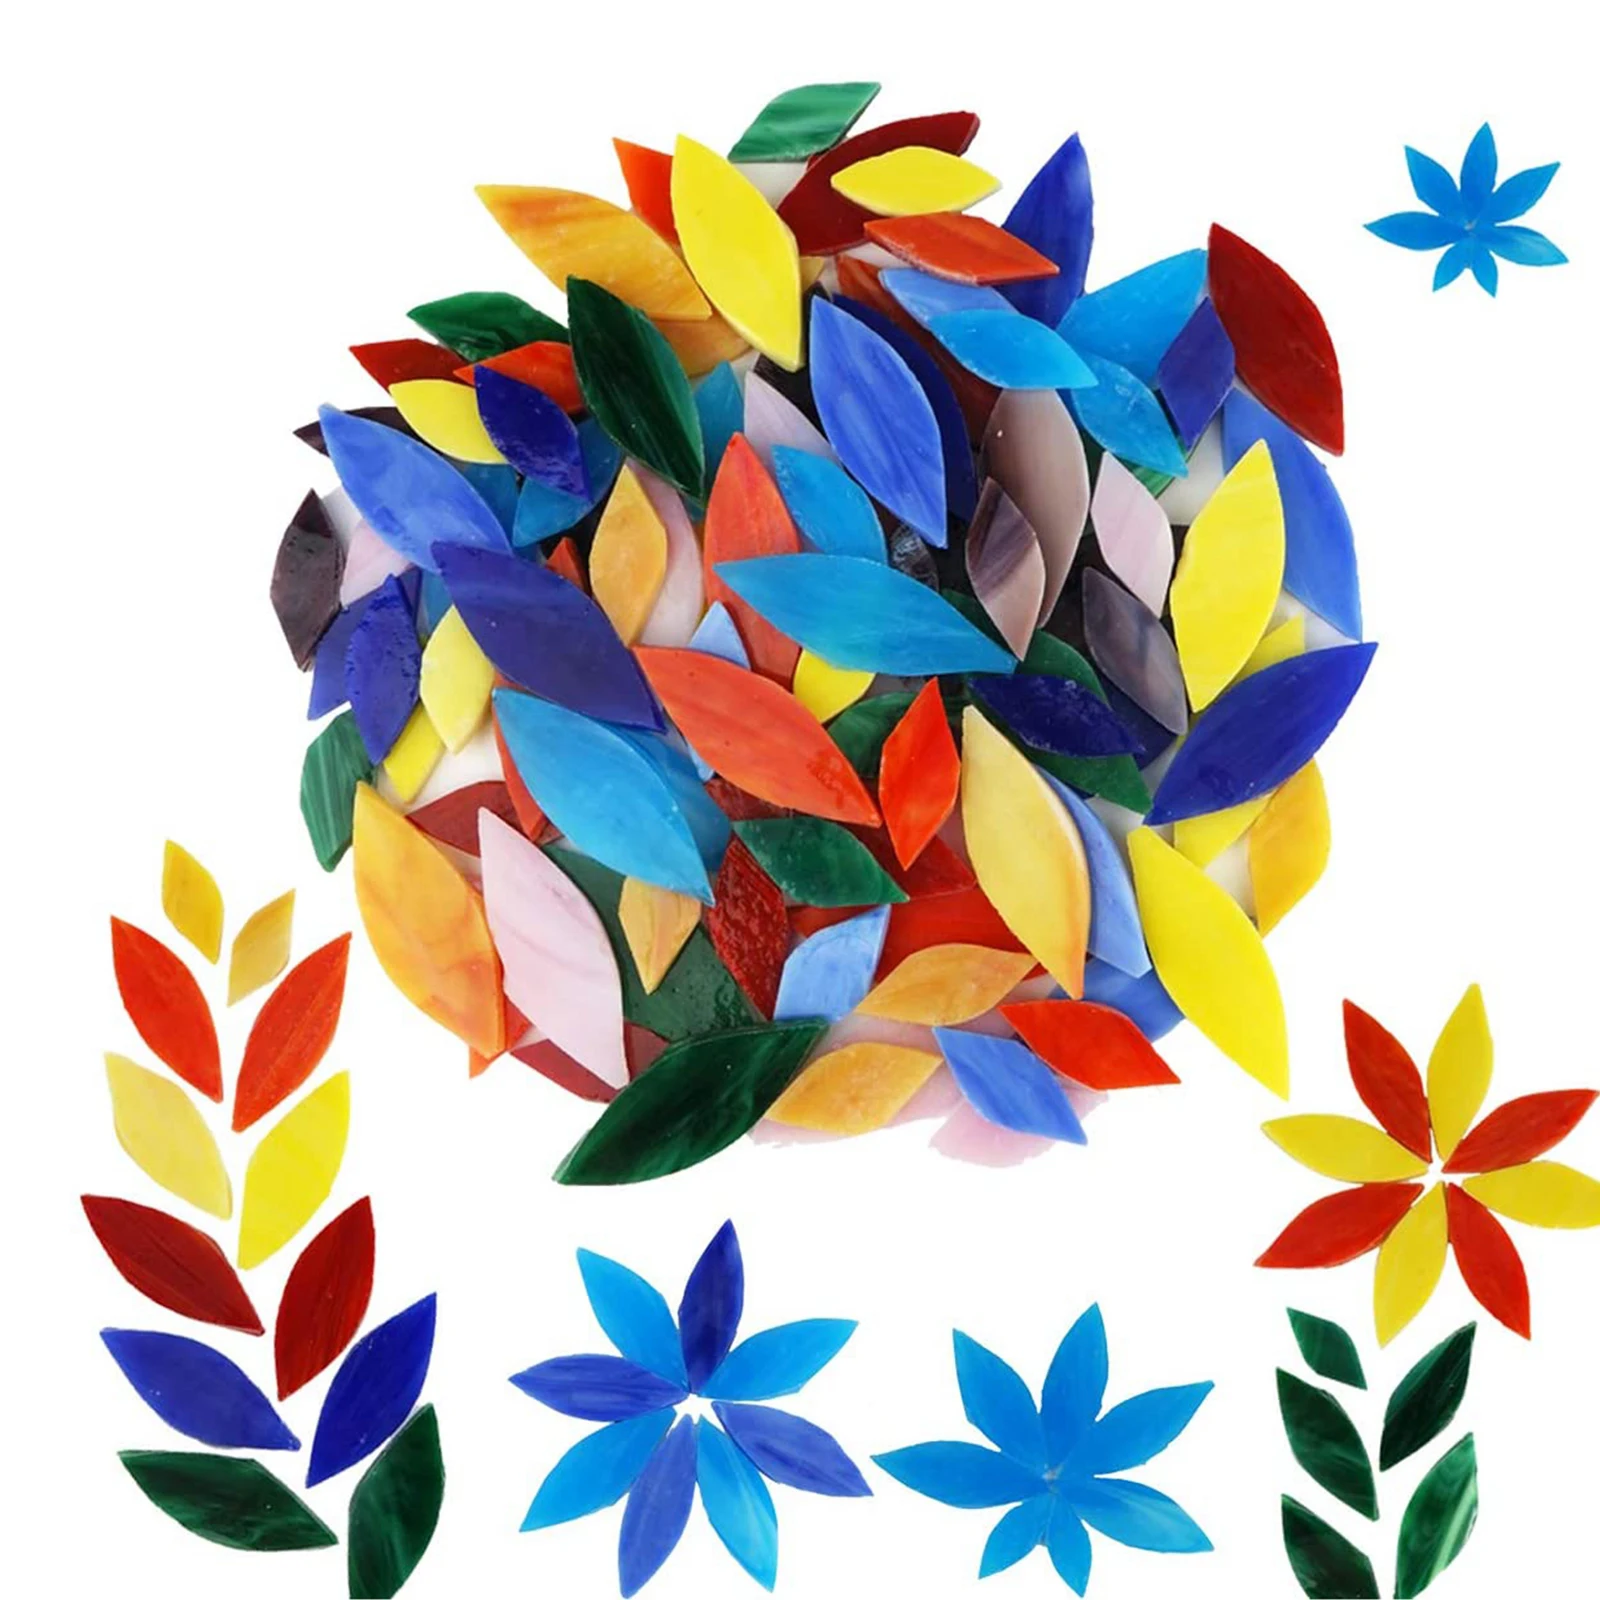 100 Pieces Petal Mosaic Tiles, Hand-Cut Stained Glass Flower Leaves Tiles for Crafts Assorted Size & Colors